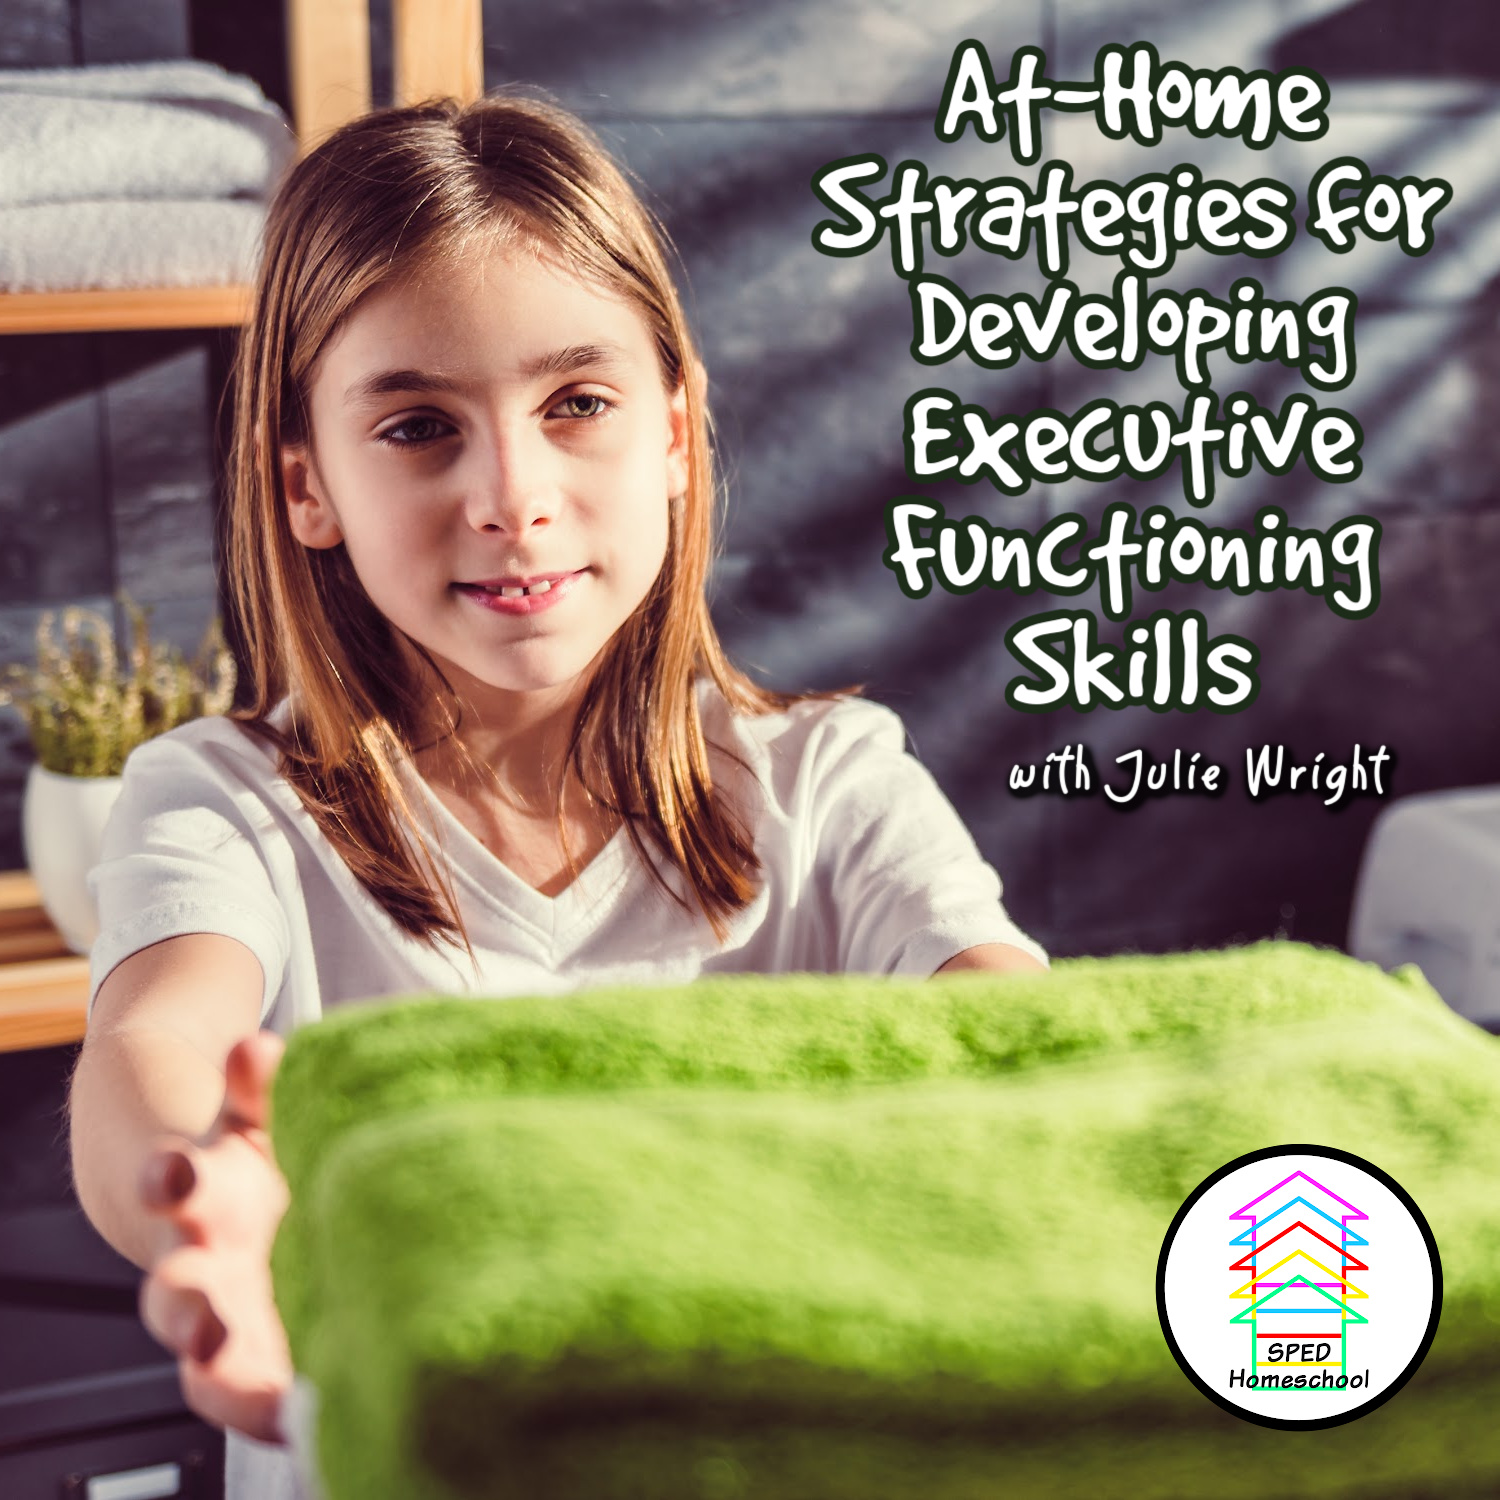 At-Home Strategies for Developing Executive Functioning Skills